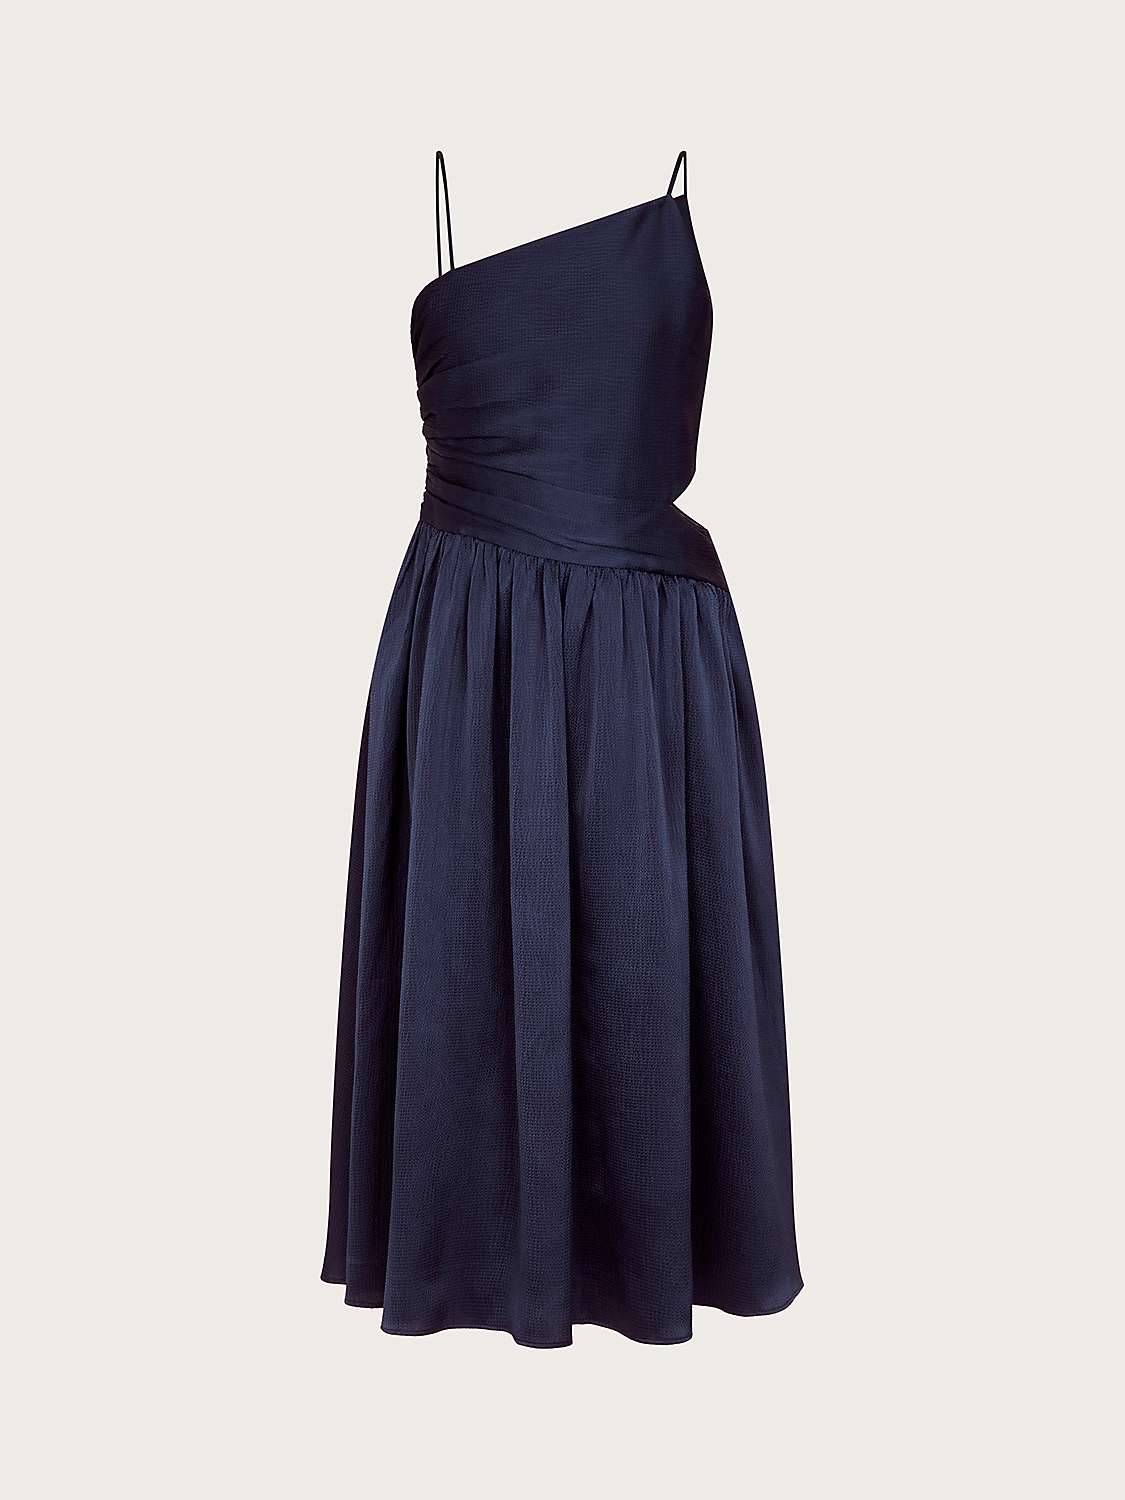 Buy Monsoon Kids' Satin Cut Out Prom Dress Online at johnlewis.com